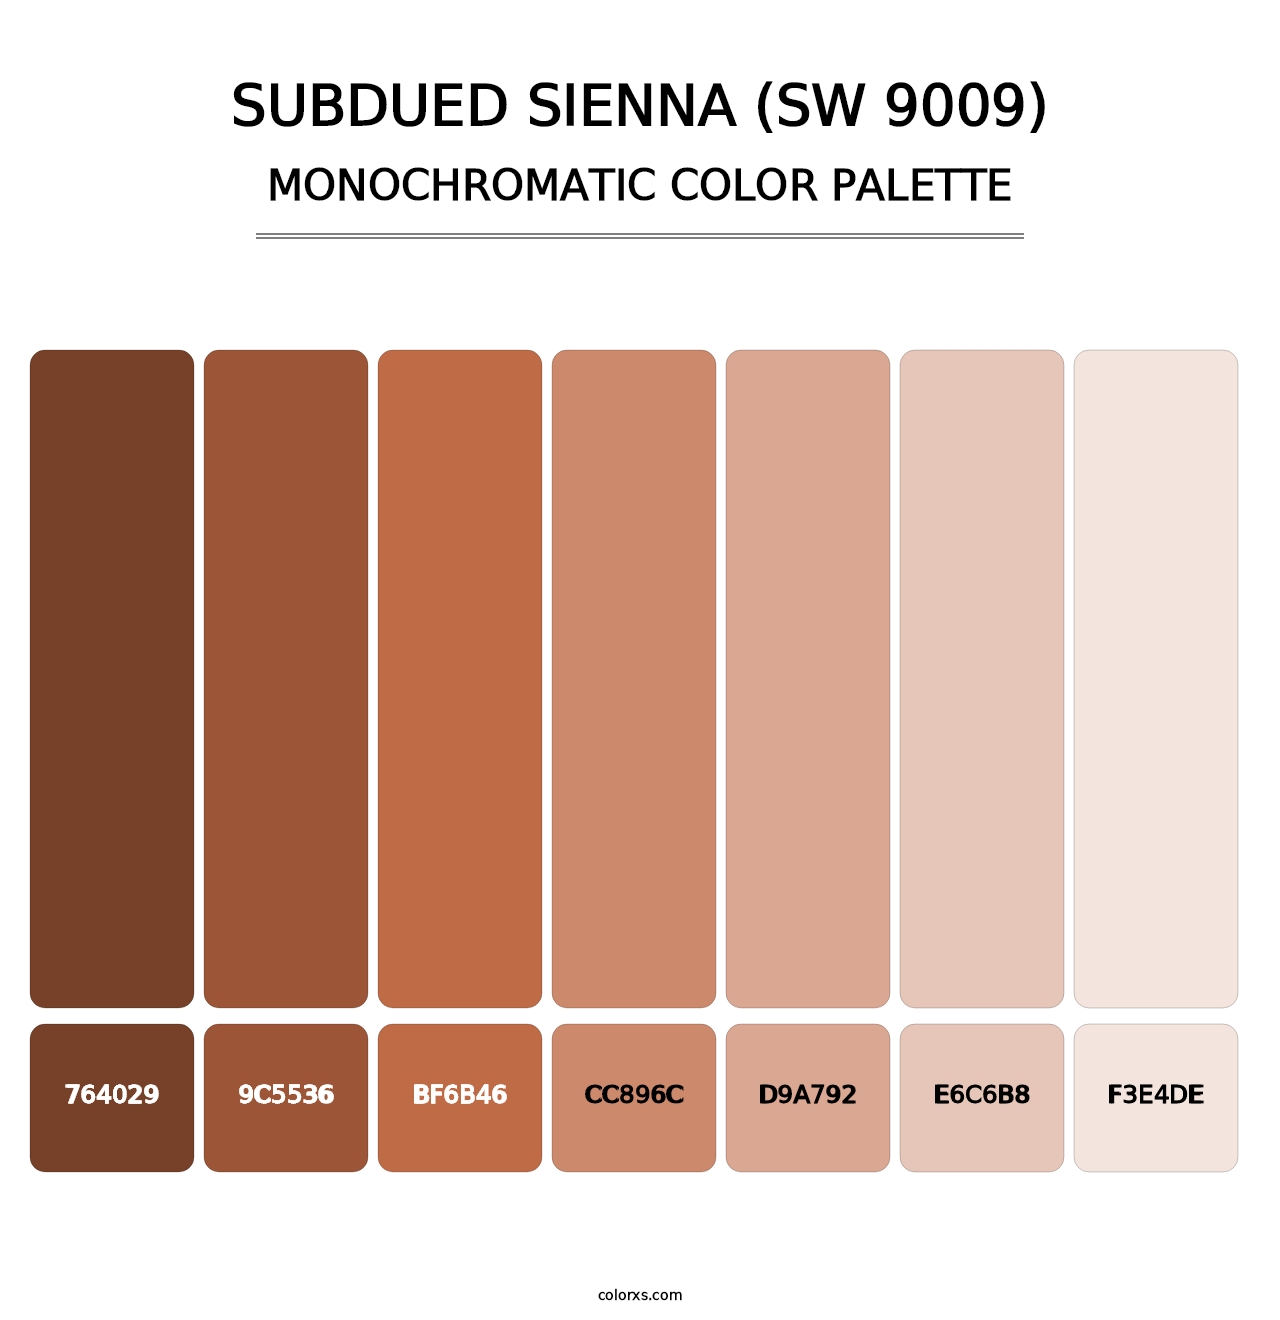 Subdued Sienna (SW 9009) - Monochromatic Color Palette